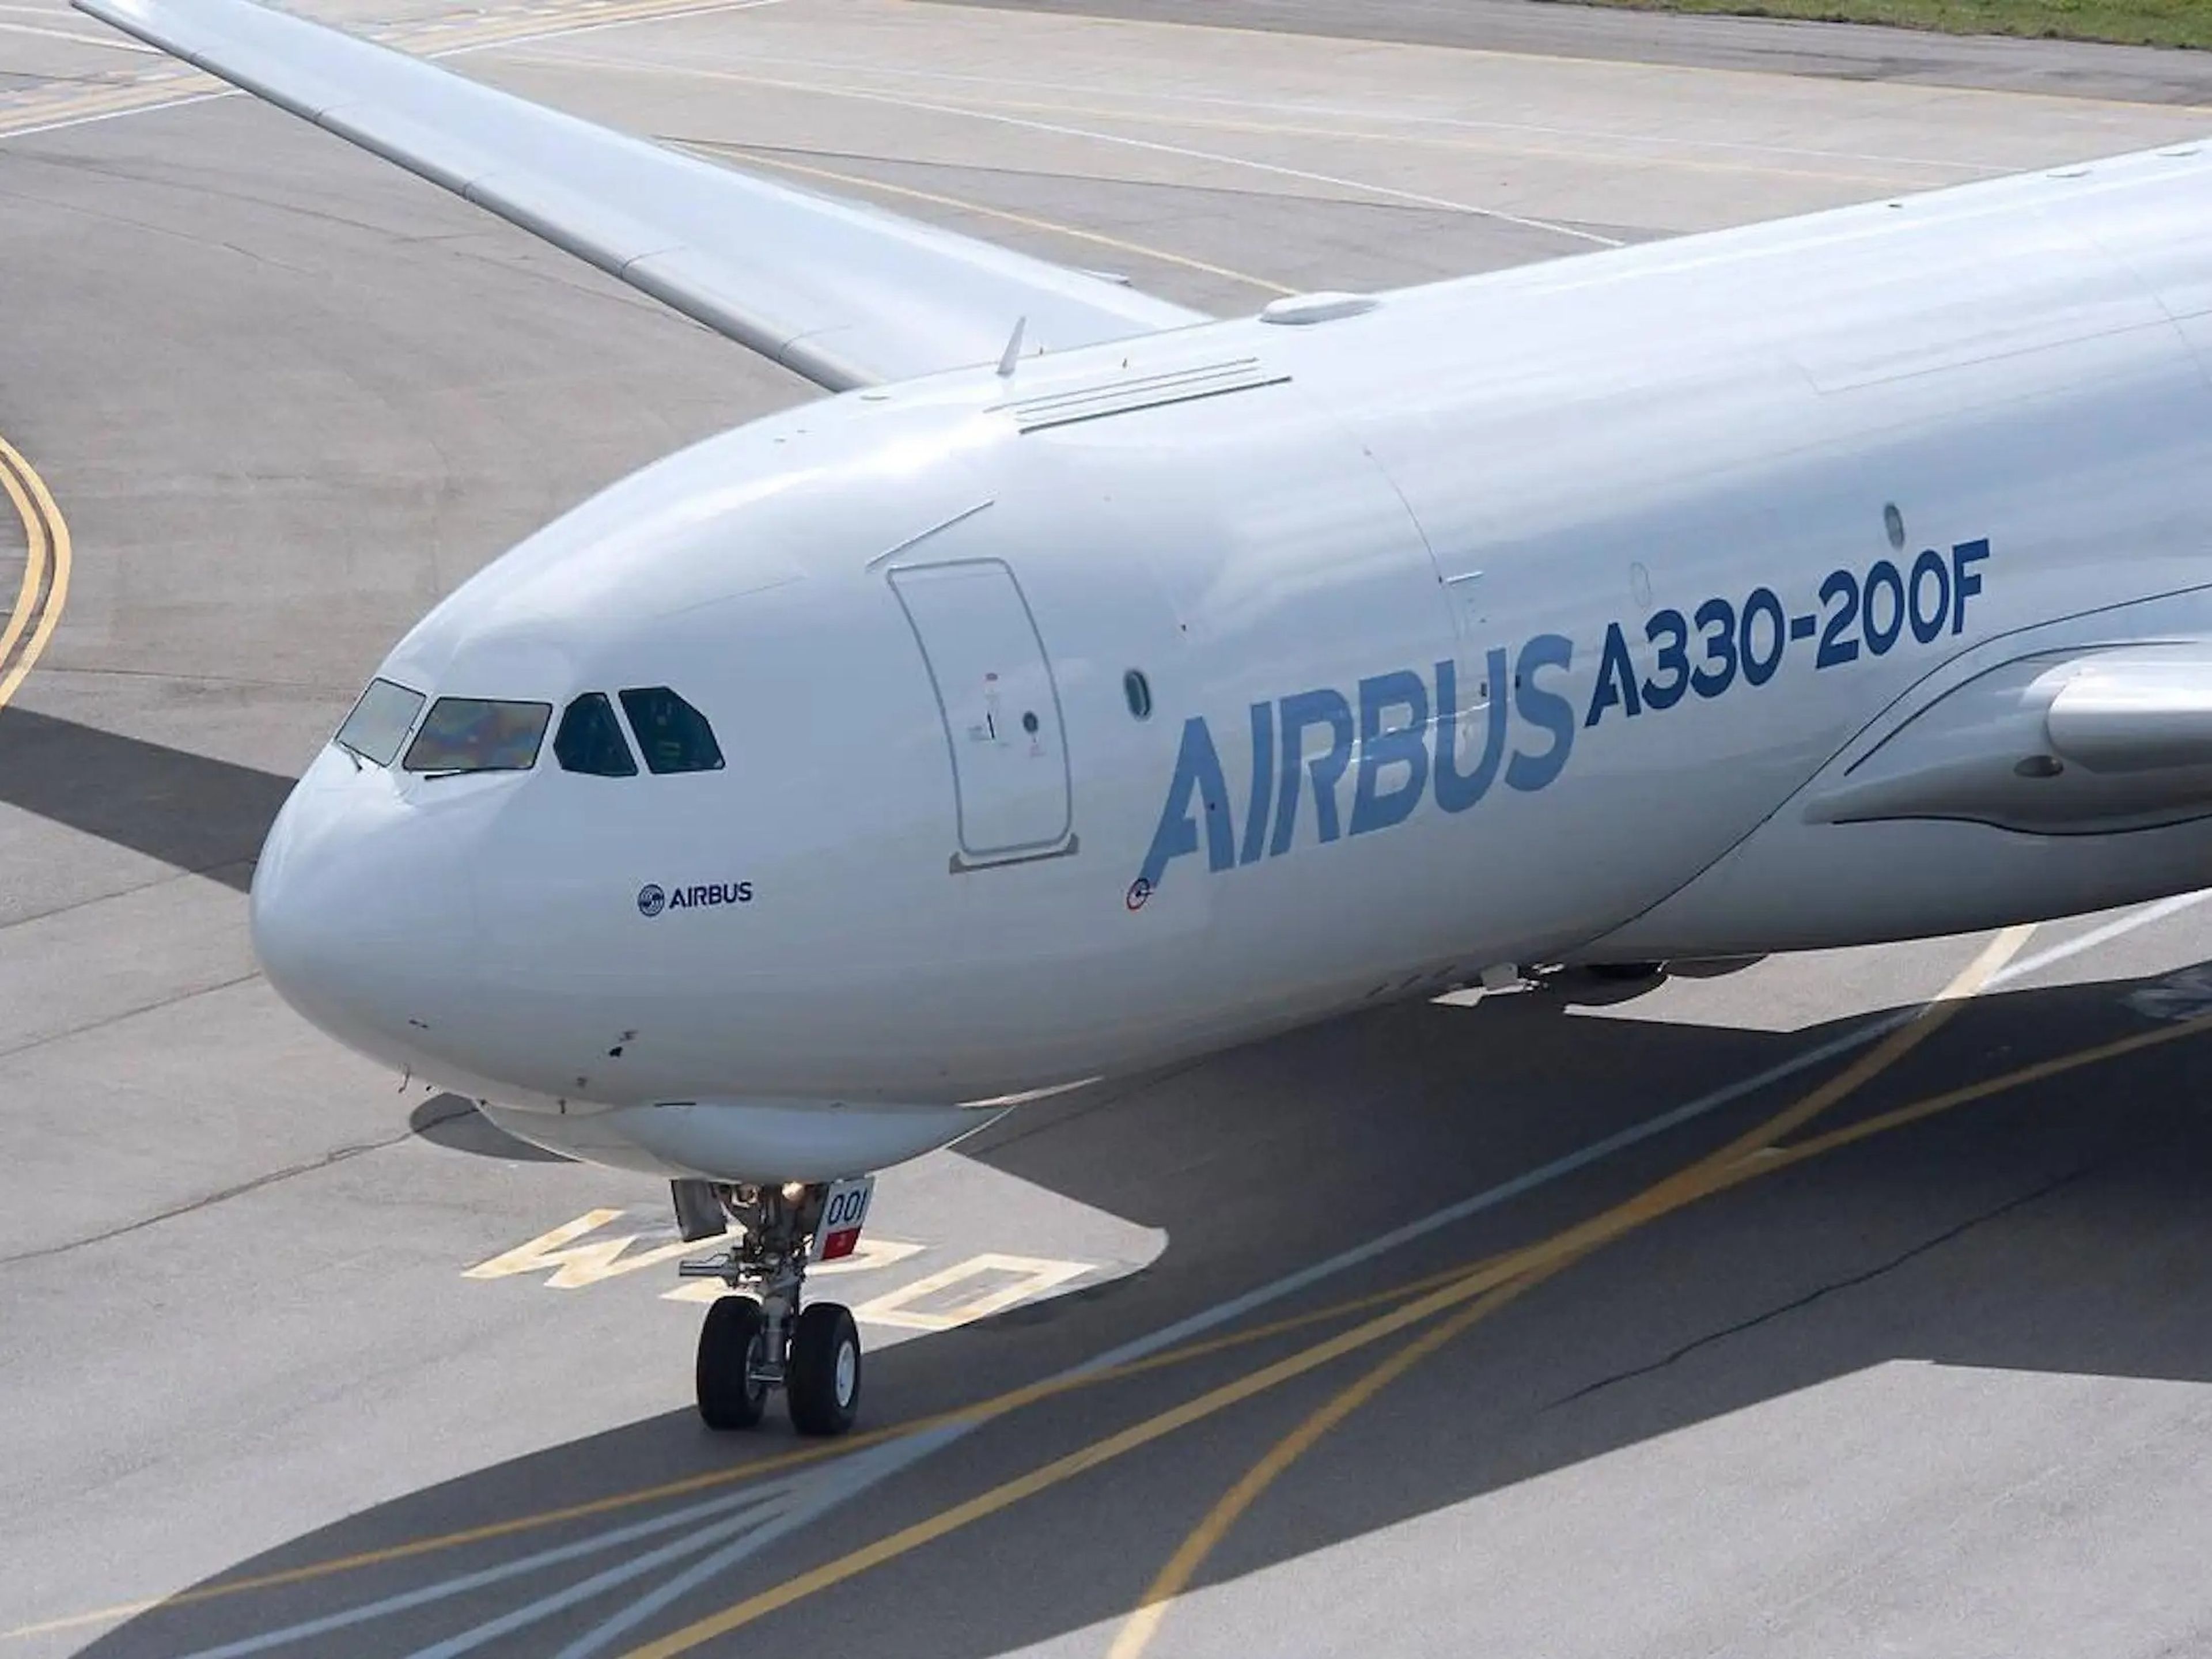 Airbus A330-200F.